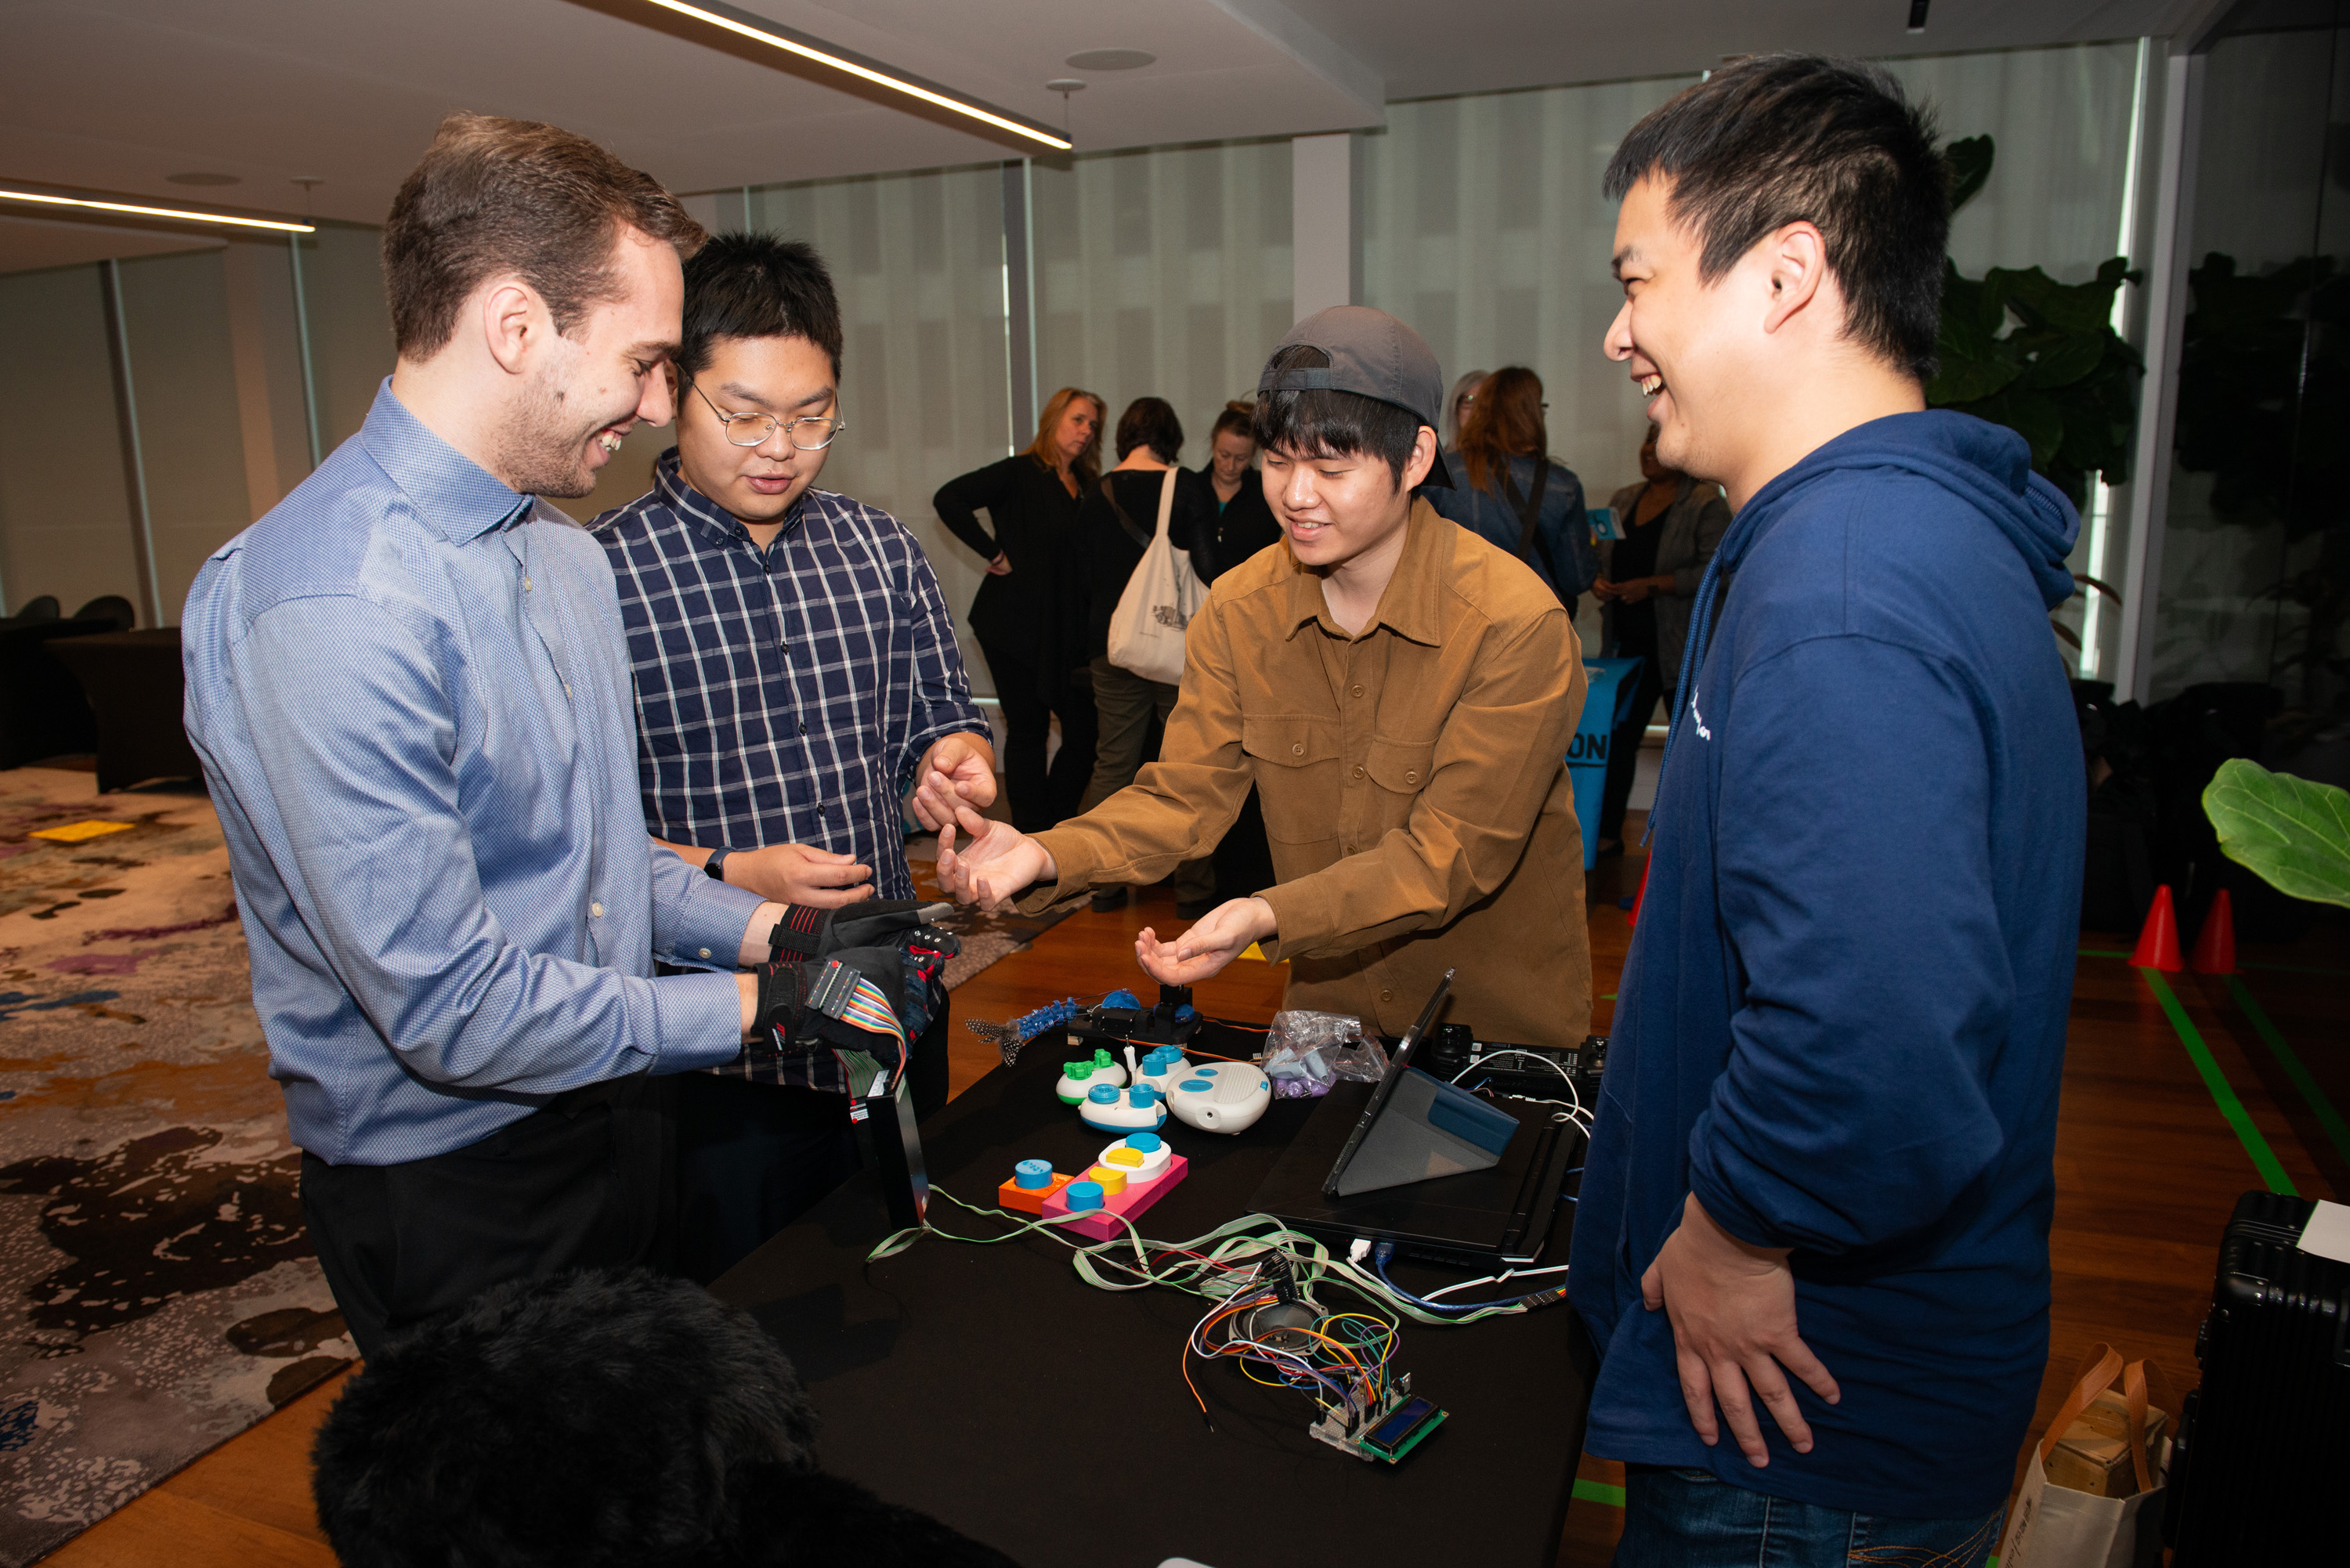 A group of people huddle over a table where some unique tech is being demonstrated. 